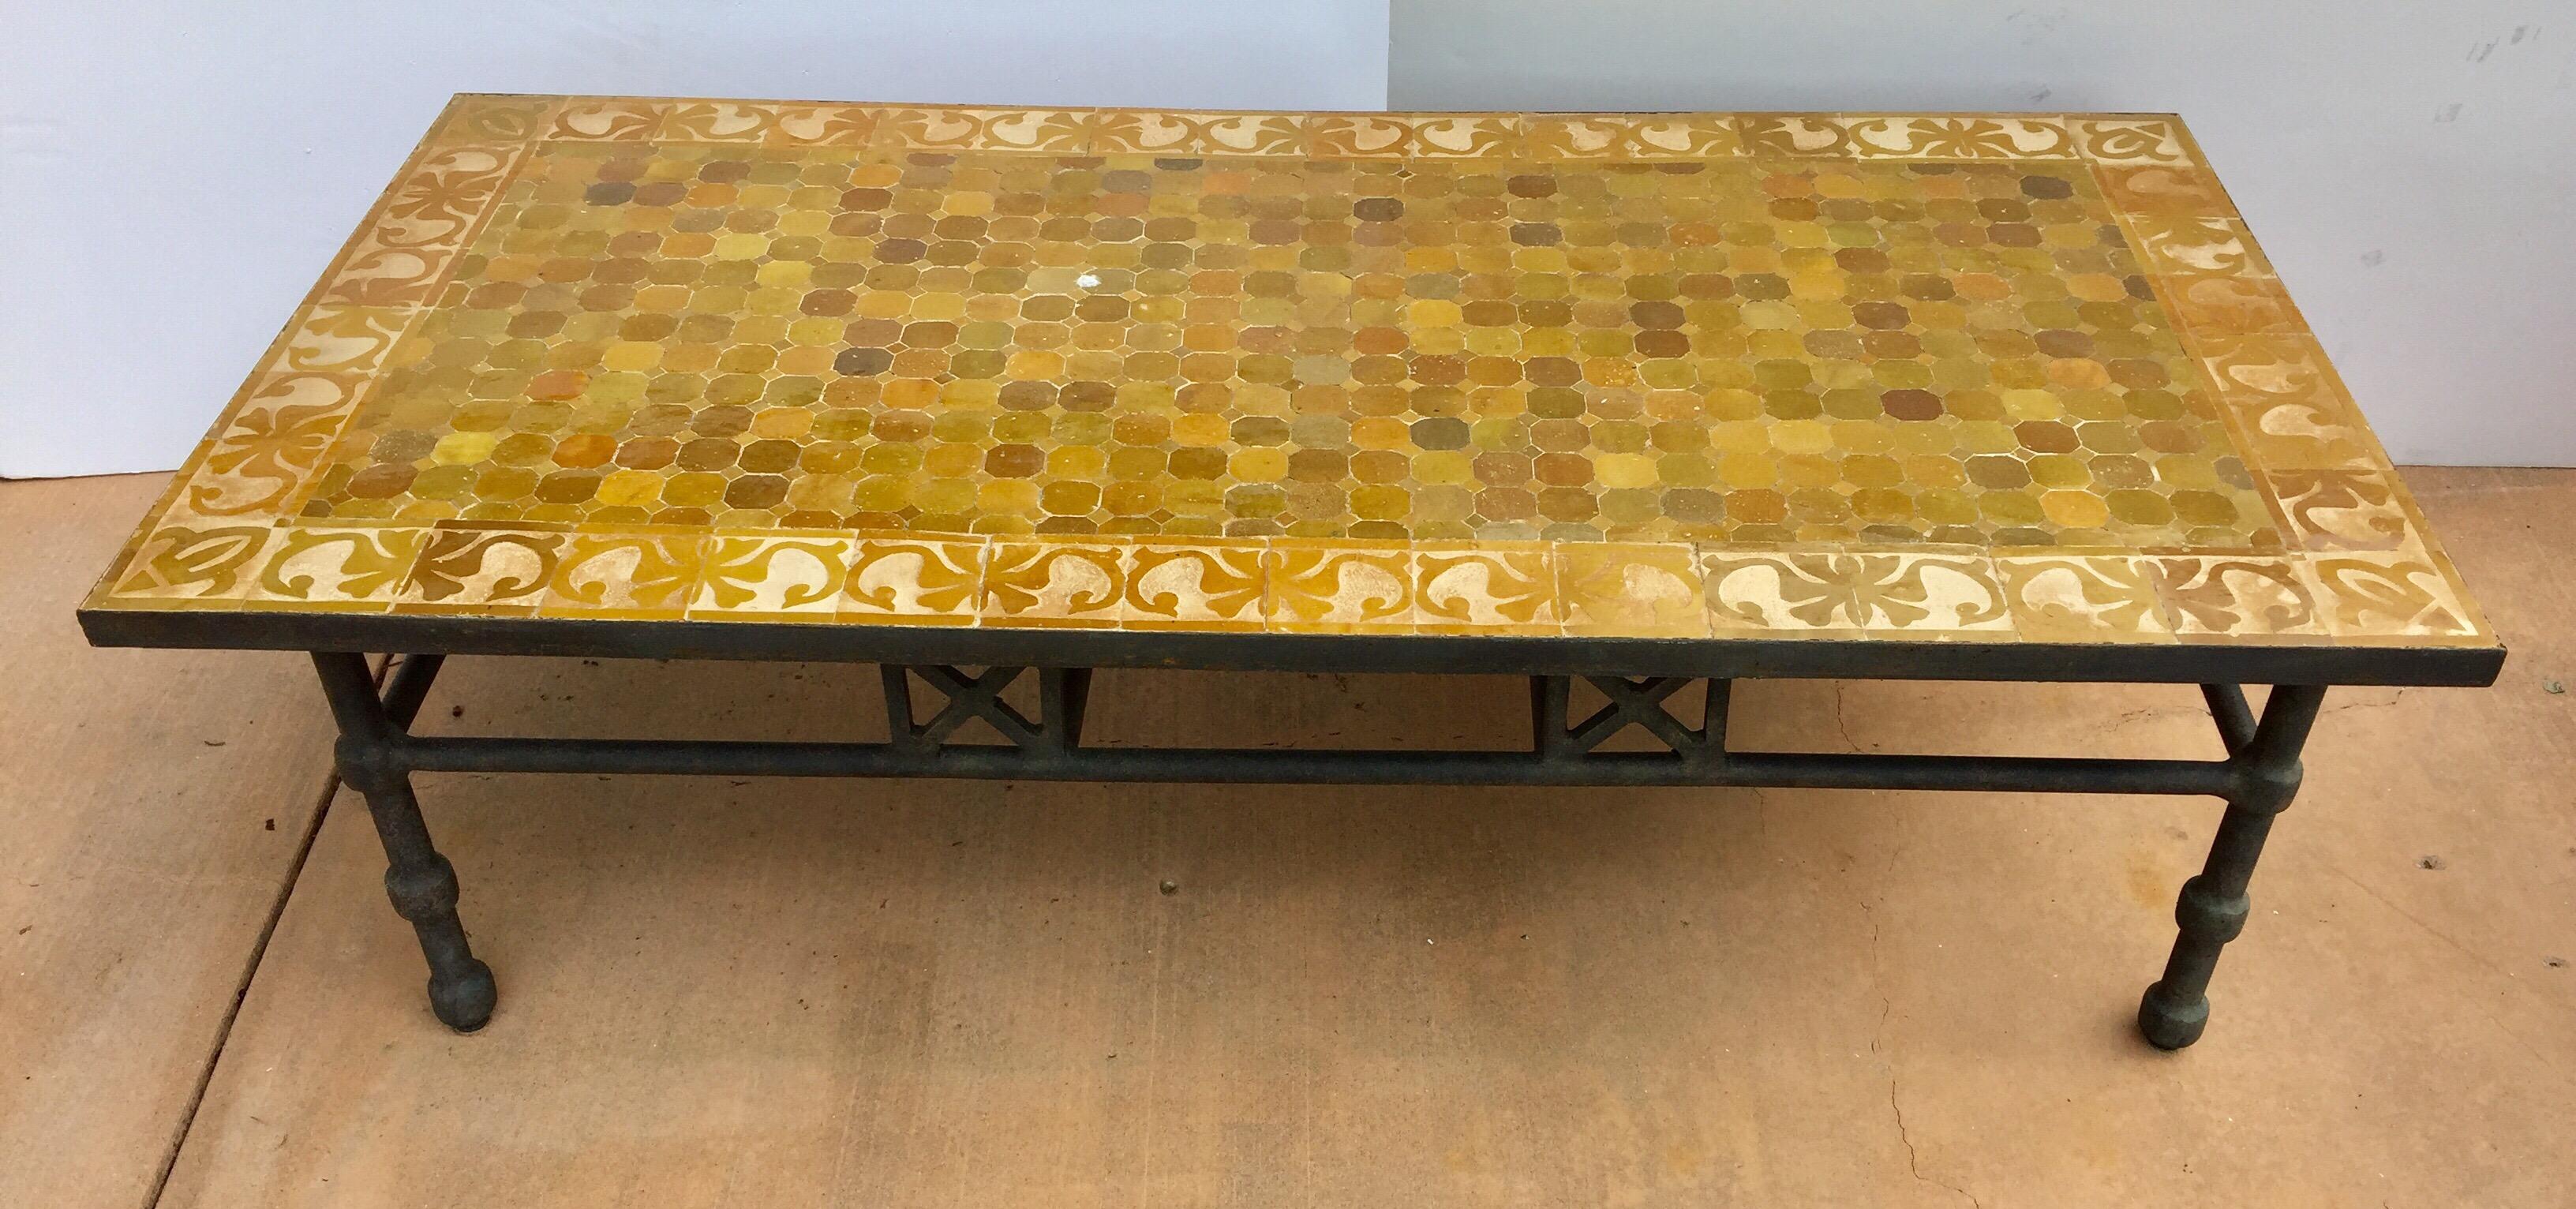 Handcrafted vintage mosaic tile tabletop, handmade using reclaimed Moroccan tiles of different shades of earth tone ochre colors, It ranges in color from yellow to deep dark brown to light brown.
Moroccan glazed and hand chased tiles.
Amazing